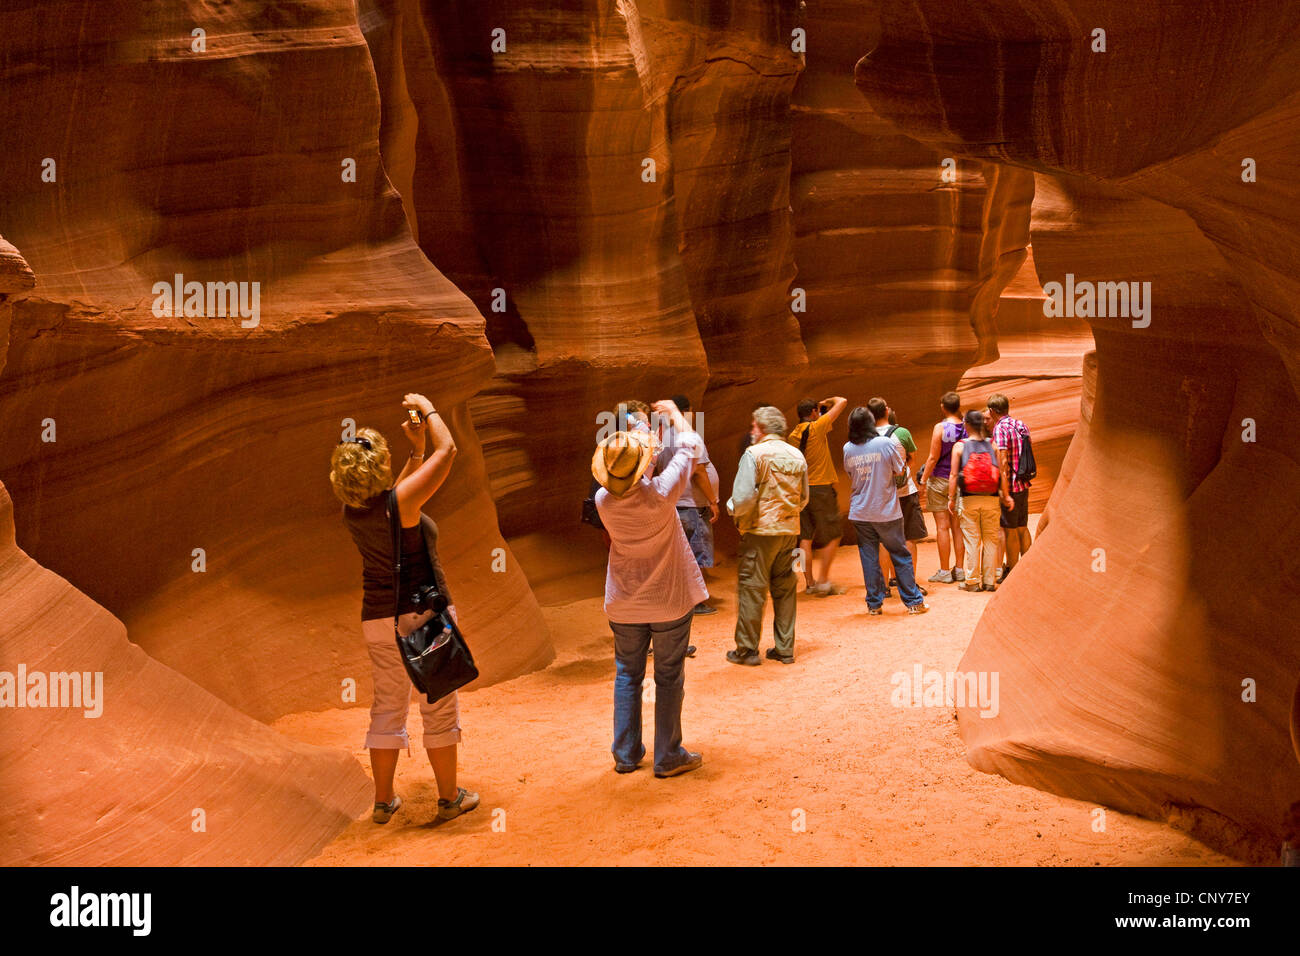 tourists taking photos in Upper Antelope canyon, USA, Arizona, Upper Antelope Canyon, Navajo Nation Reservation Stock Photo